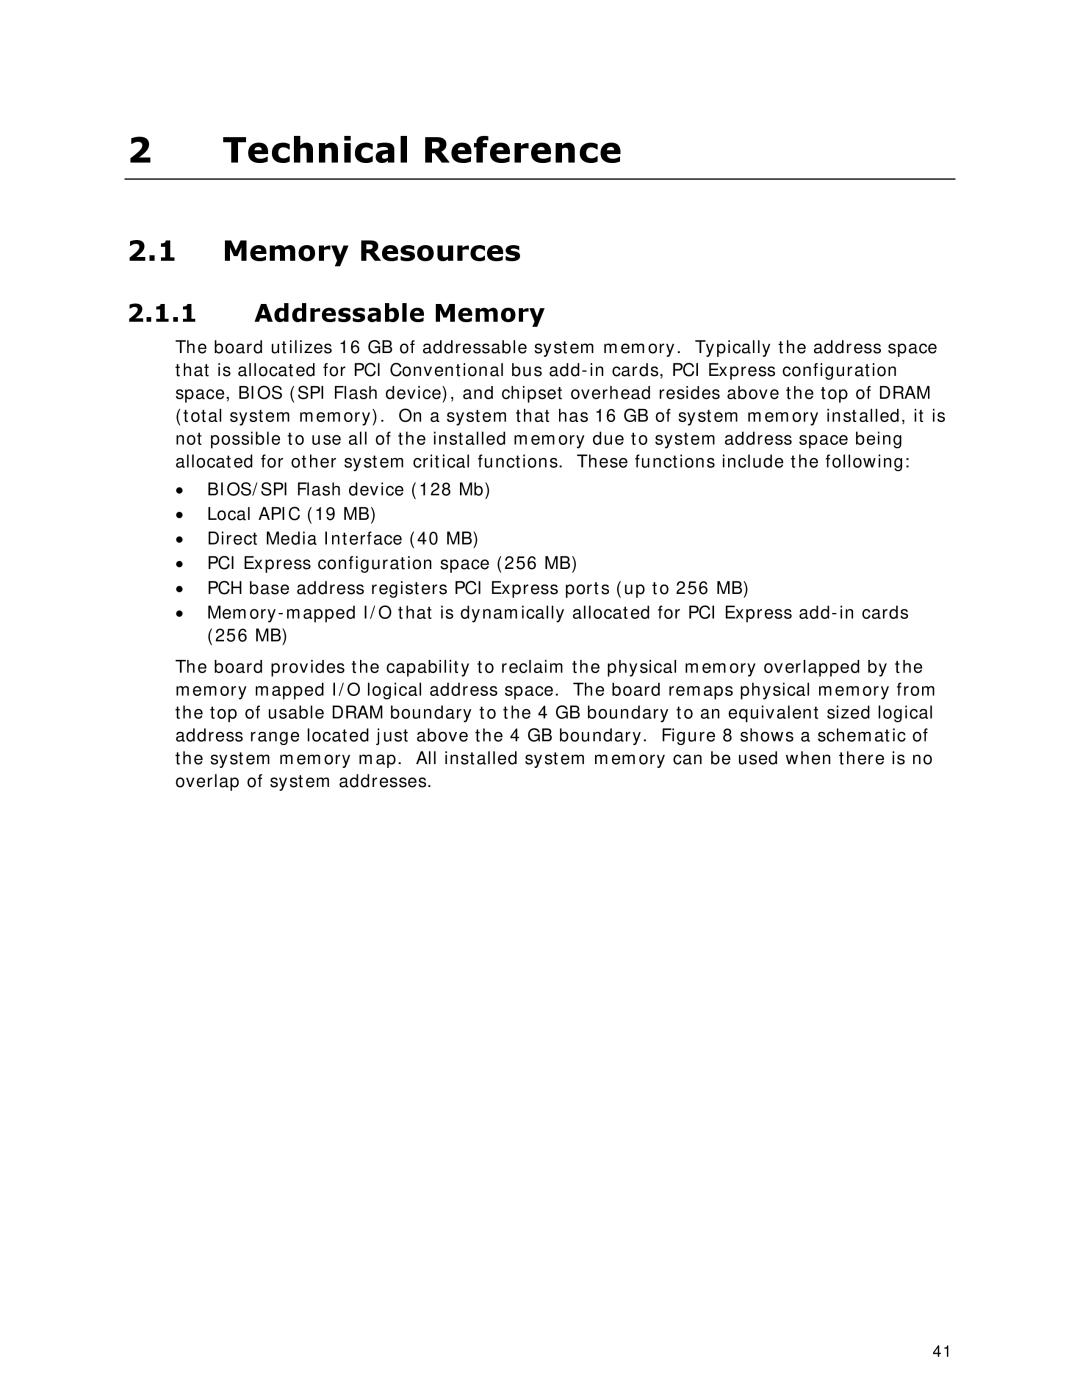 Intel BOXDC53427HYE specifications Memory Resources, Addressable Memory 